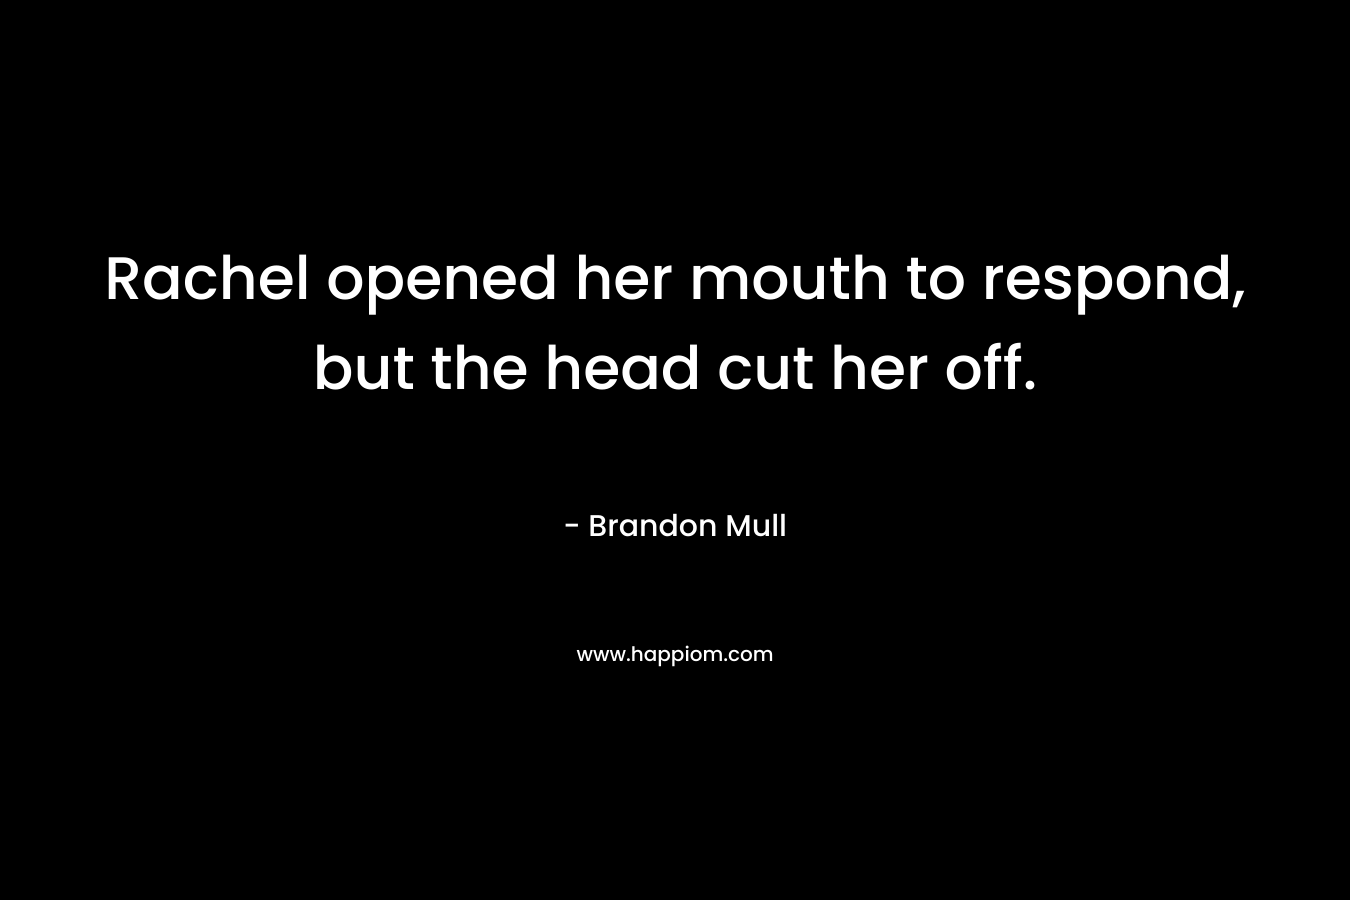 Rachel opened her mouth to respond, but the head cut her off. – Brandon Mull